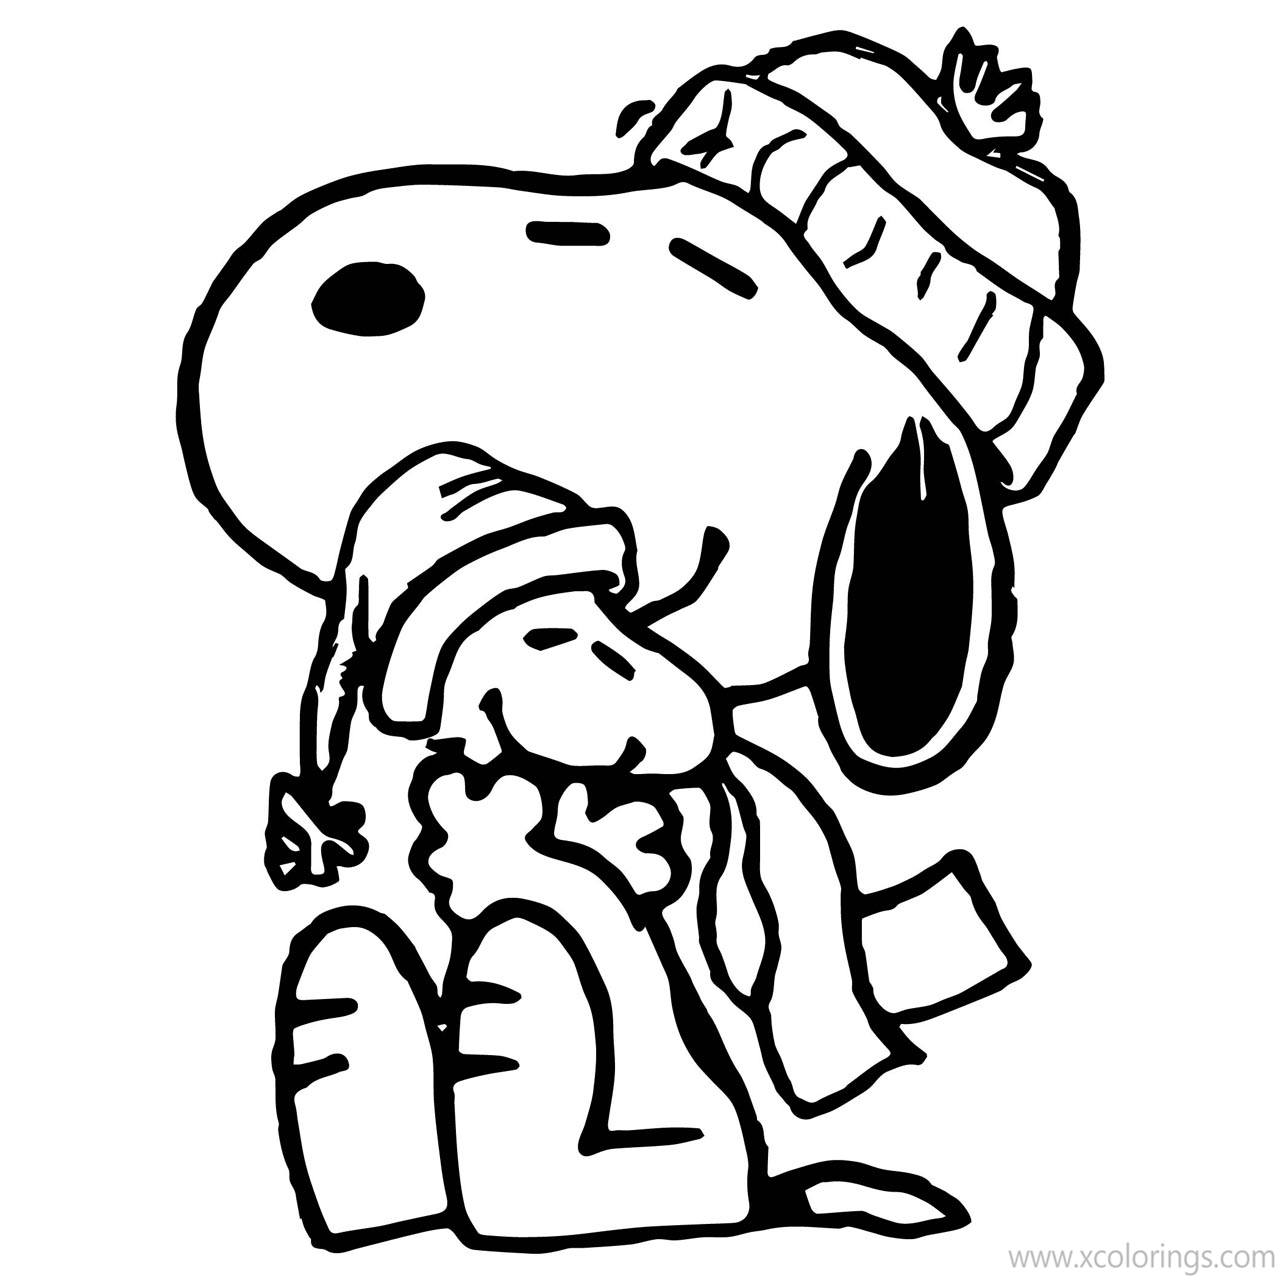 Free Charlie Brown Christmas Coloring Pages Snoopy and Woodstock printable